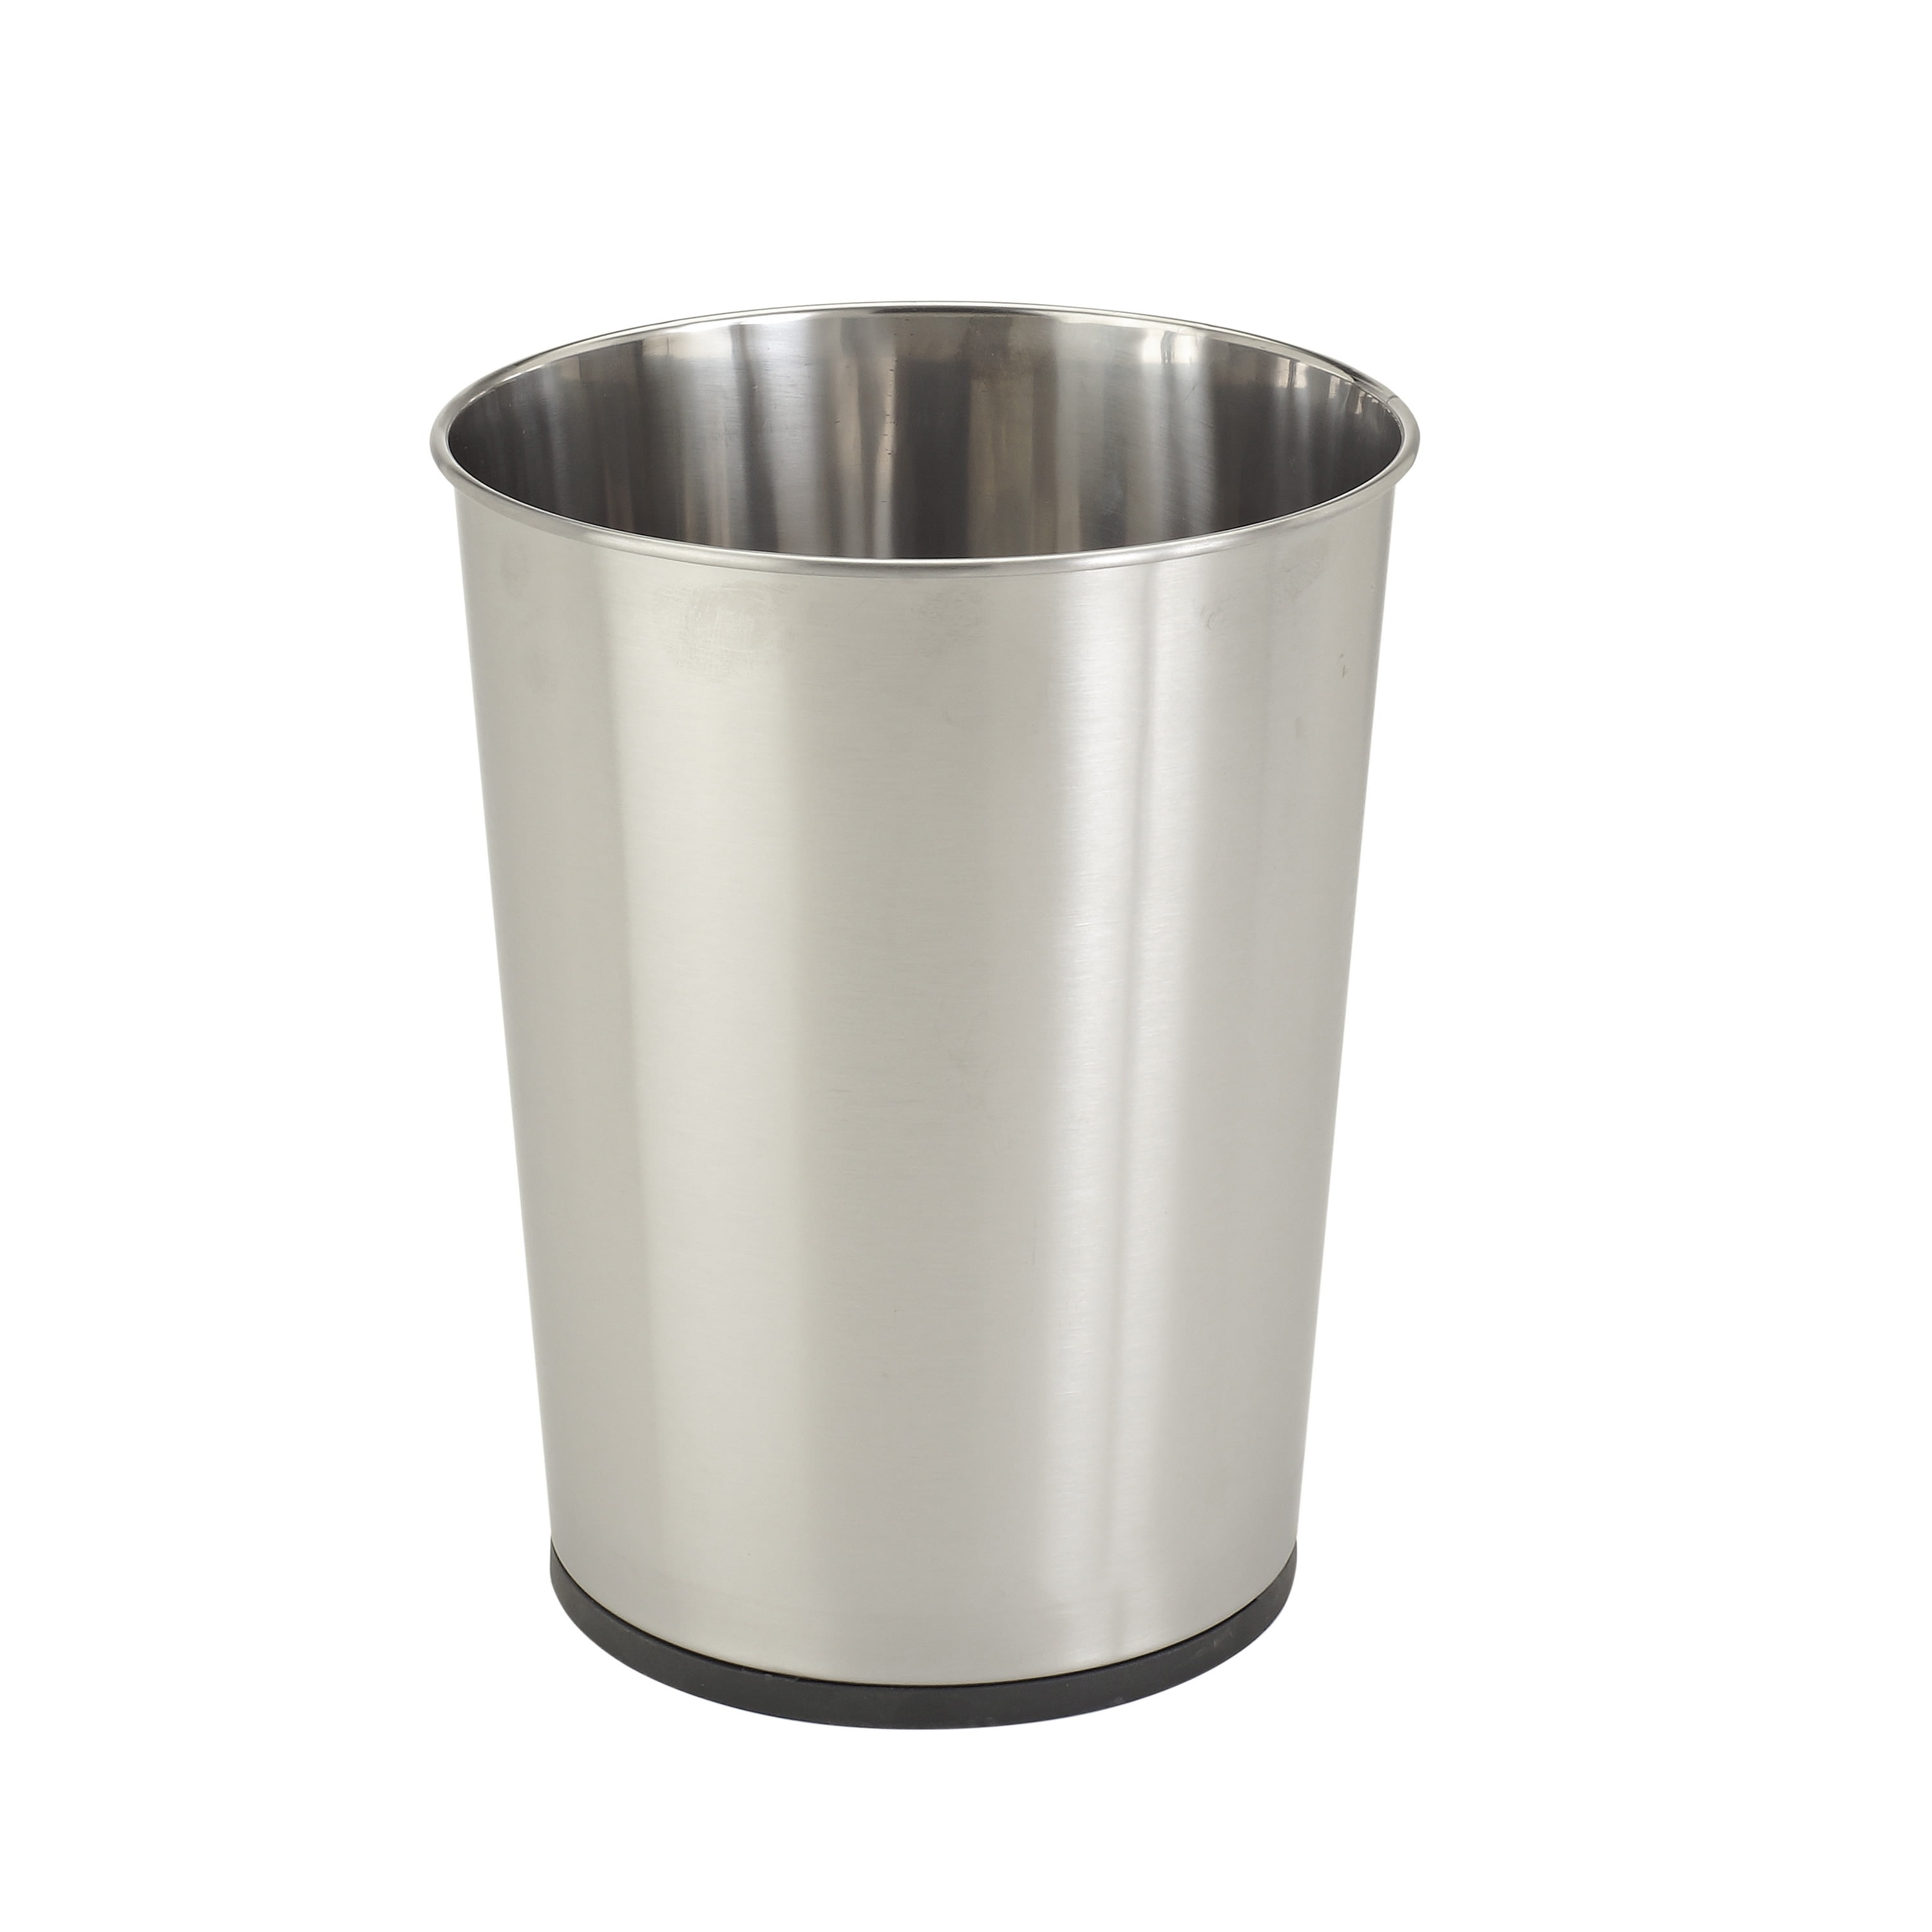 Insignia NS-ATC3SS1 3 gal. Automatic Trash Can - Stainless Steel